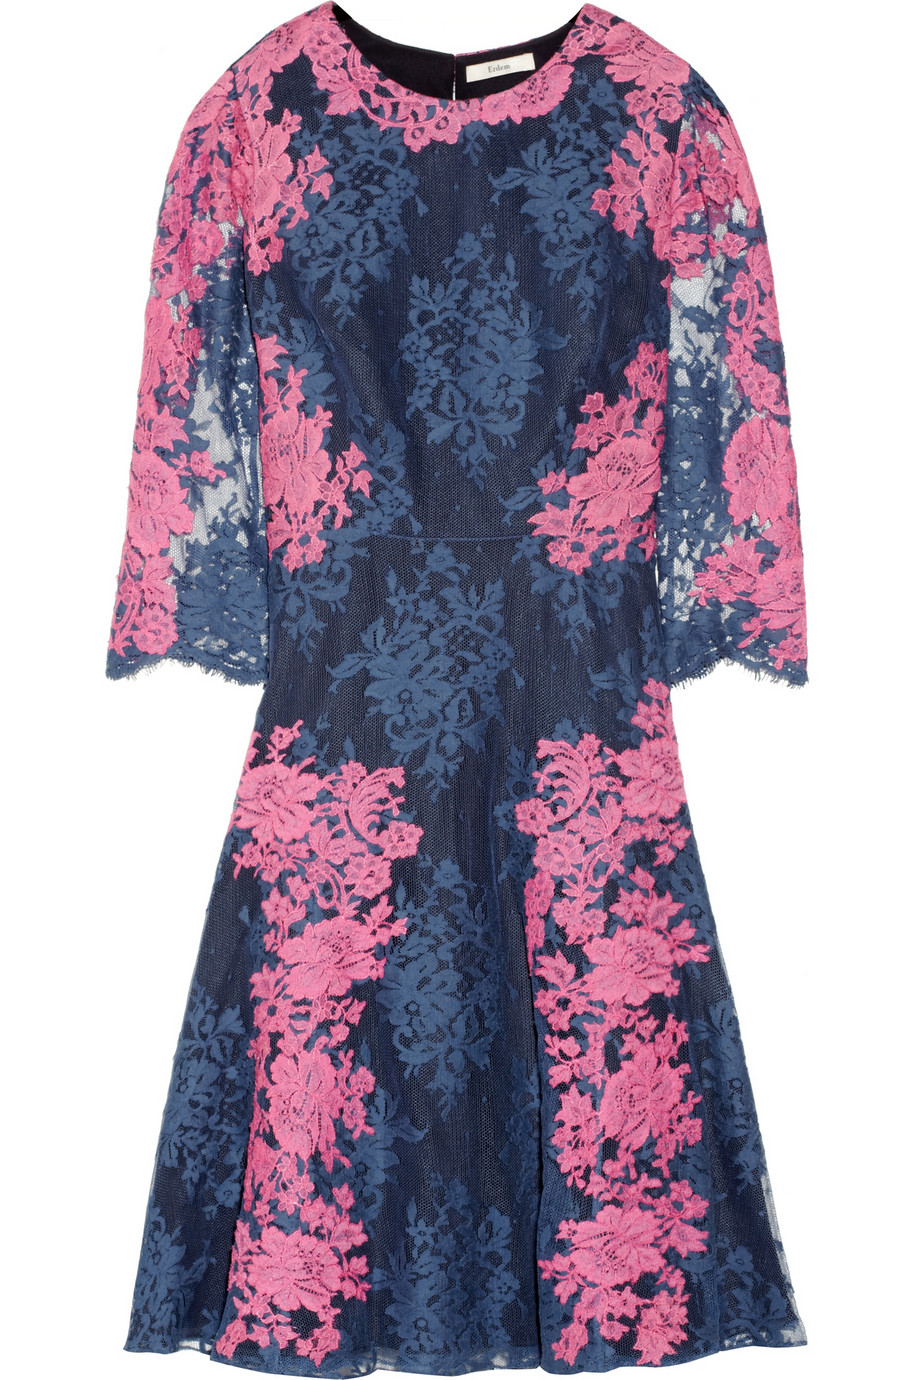 Erdem Lily Embroidered Cottonblend Lace Dress in Blue | Lyst